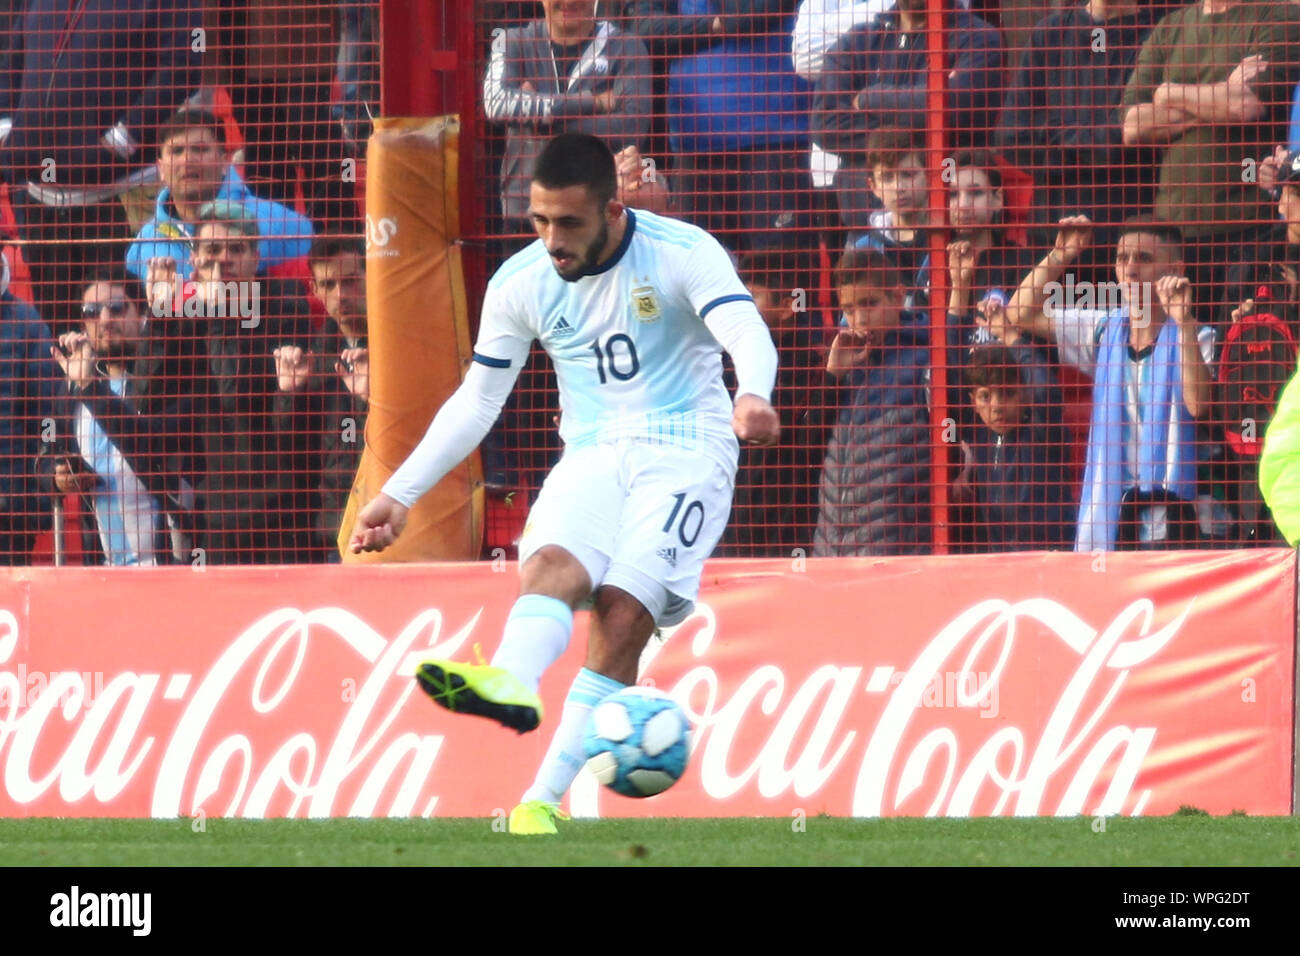 BUENOS AIRES, 08.09.2019: Matias Vargas during the match between Argentina and Colombia for friendly match on Diego Maradona Stadium in Buenos Aires, Stock Photo